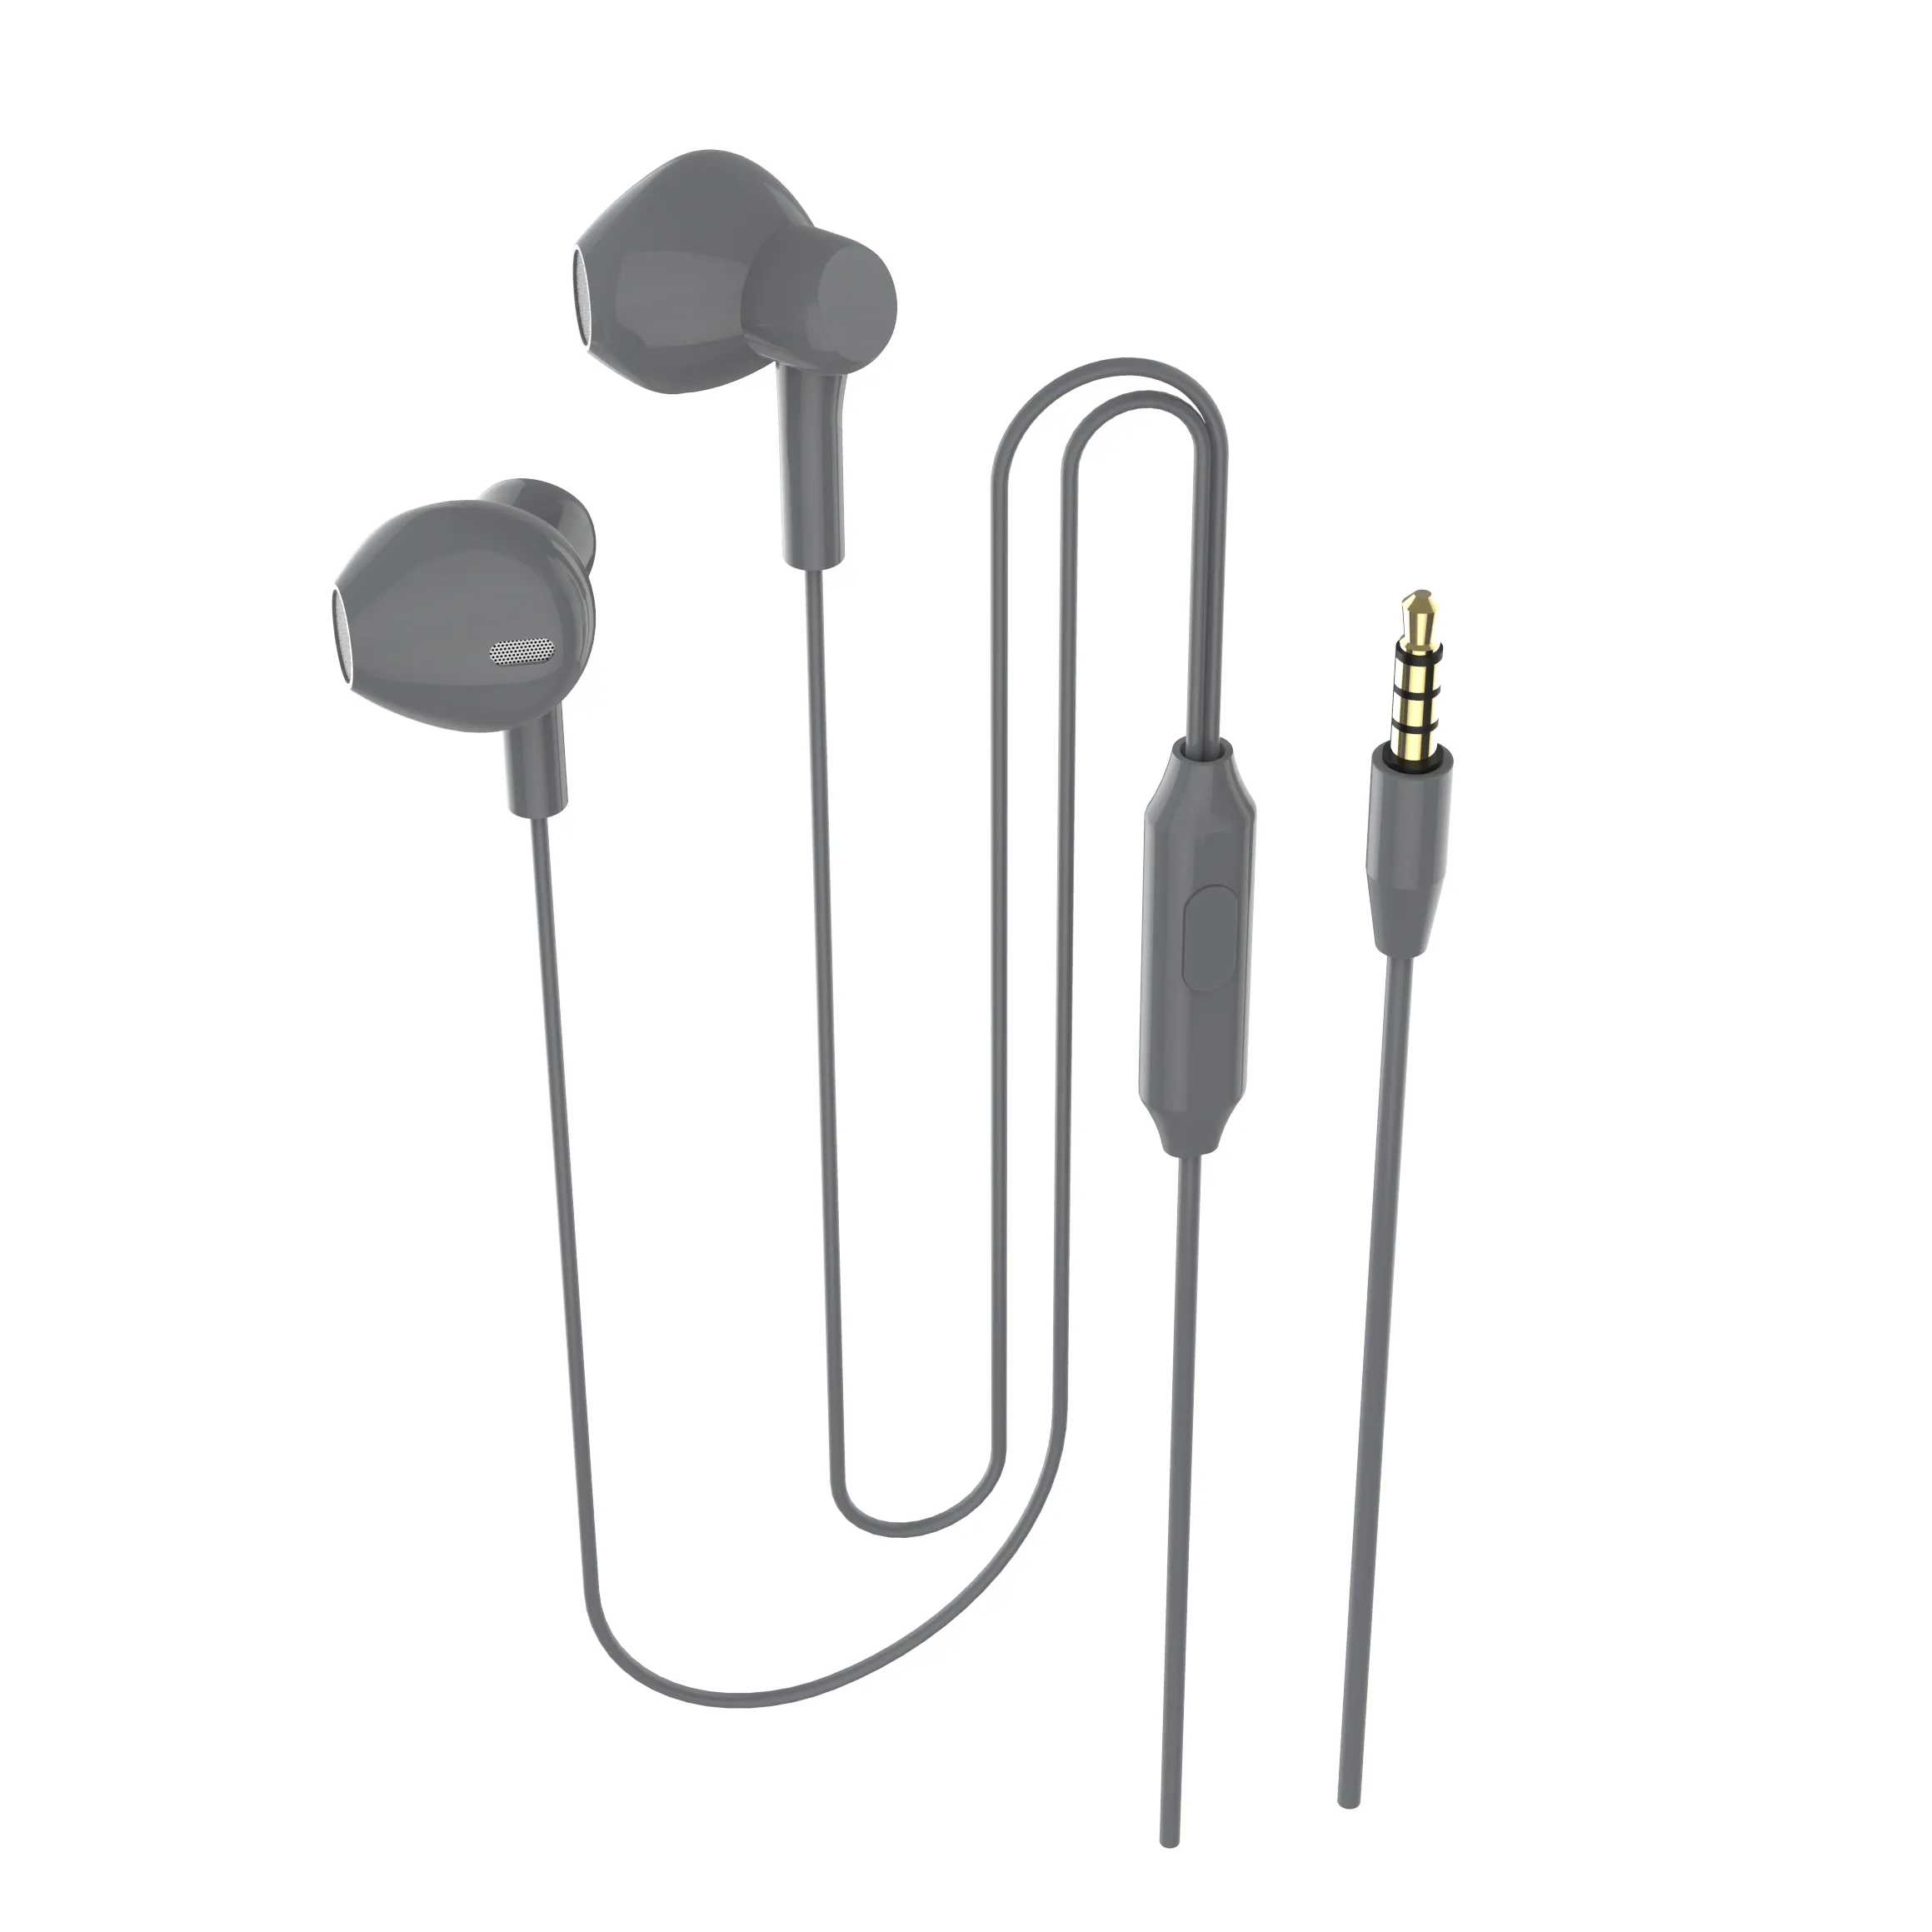 Cheap headphones stereo wired wholesale earphones in-ear headset for mobile phones